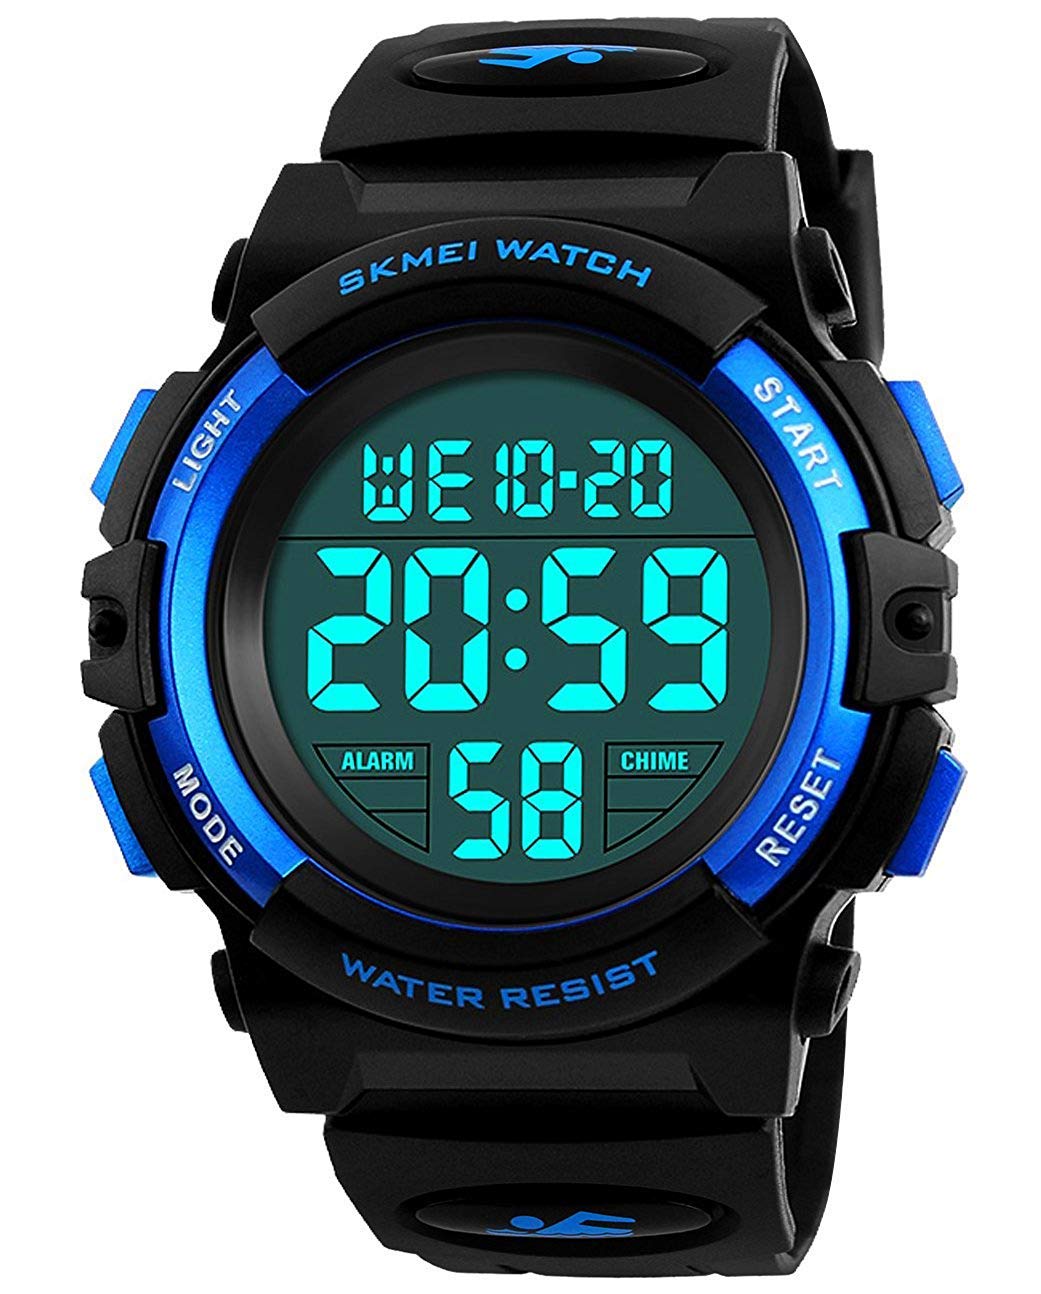 cofuo Kids Digital Sports Watch for Boys Girls, Boy Waterproof Casual Electronic Analog Quartz 7 Colorful Led Watches with Alarm Stopwatch Silicone Band Luminous Wristatches